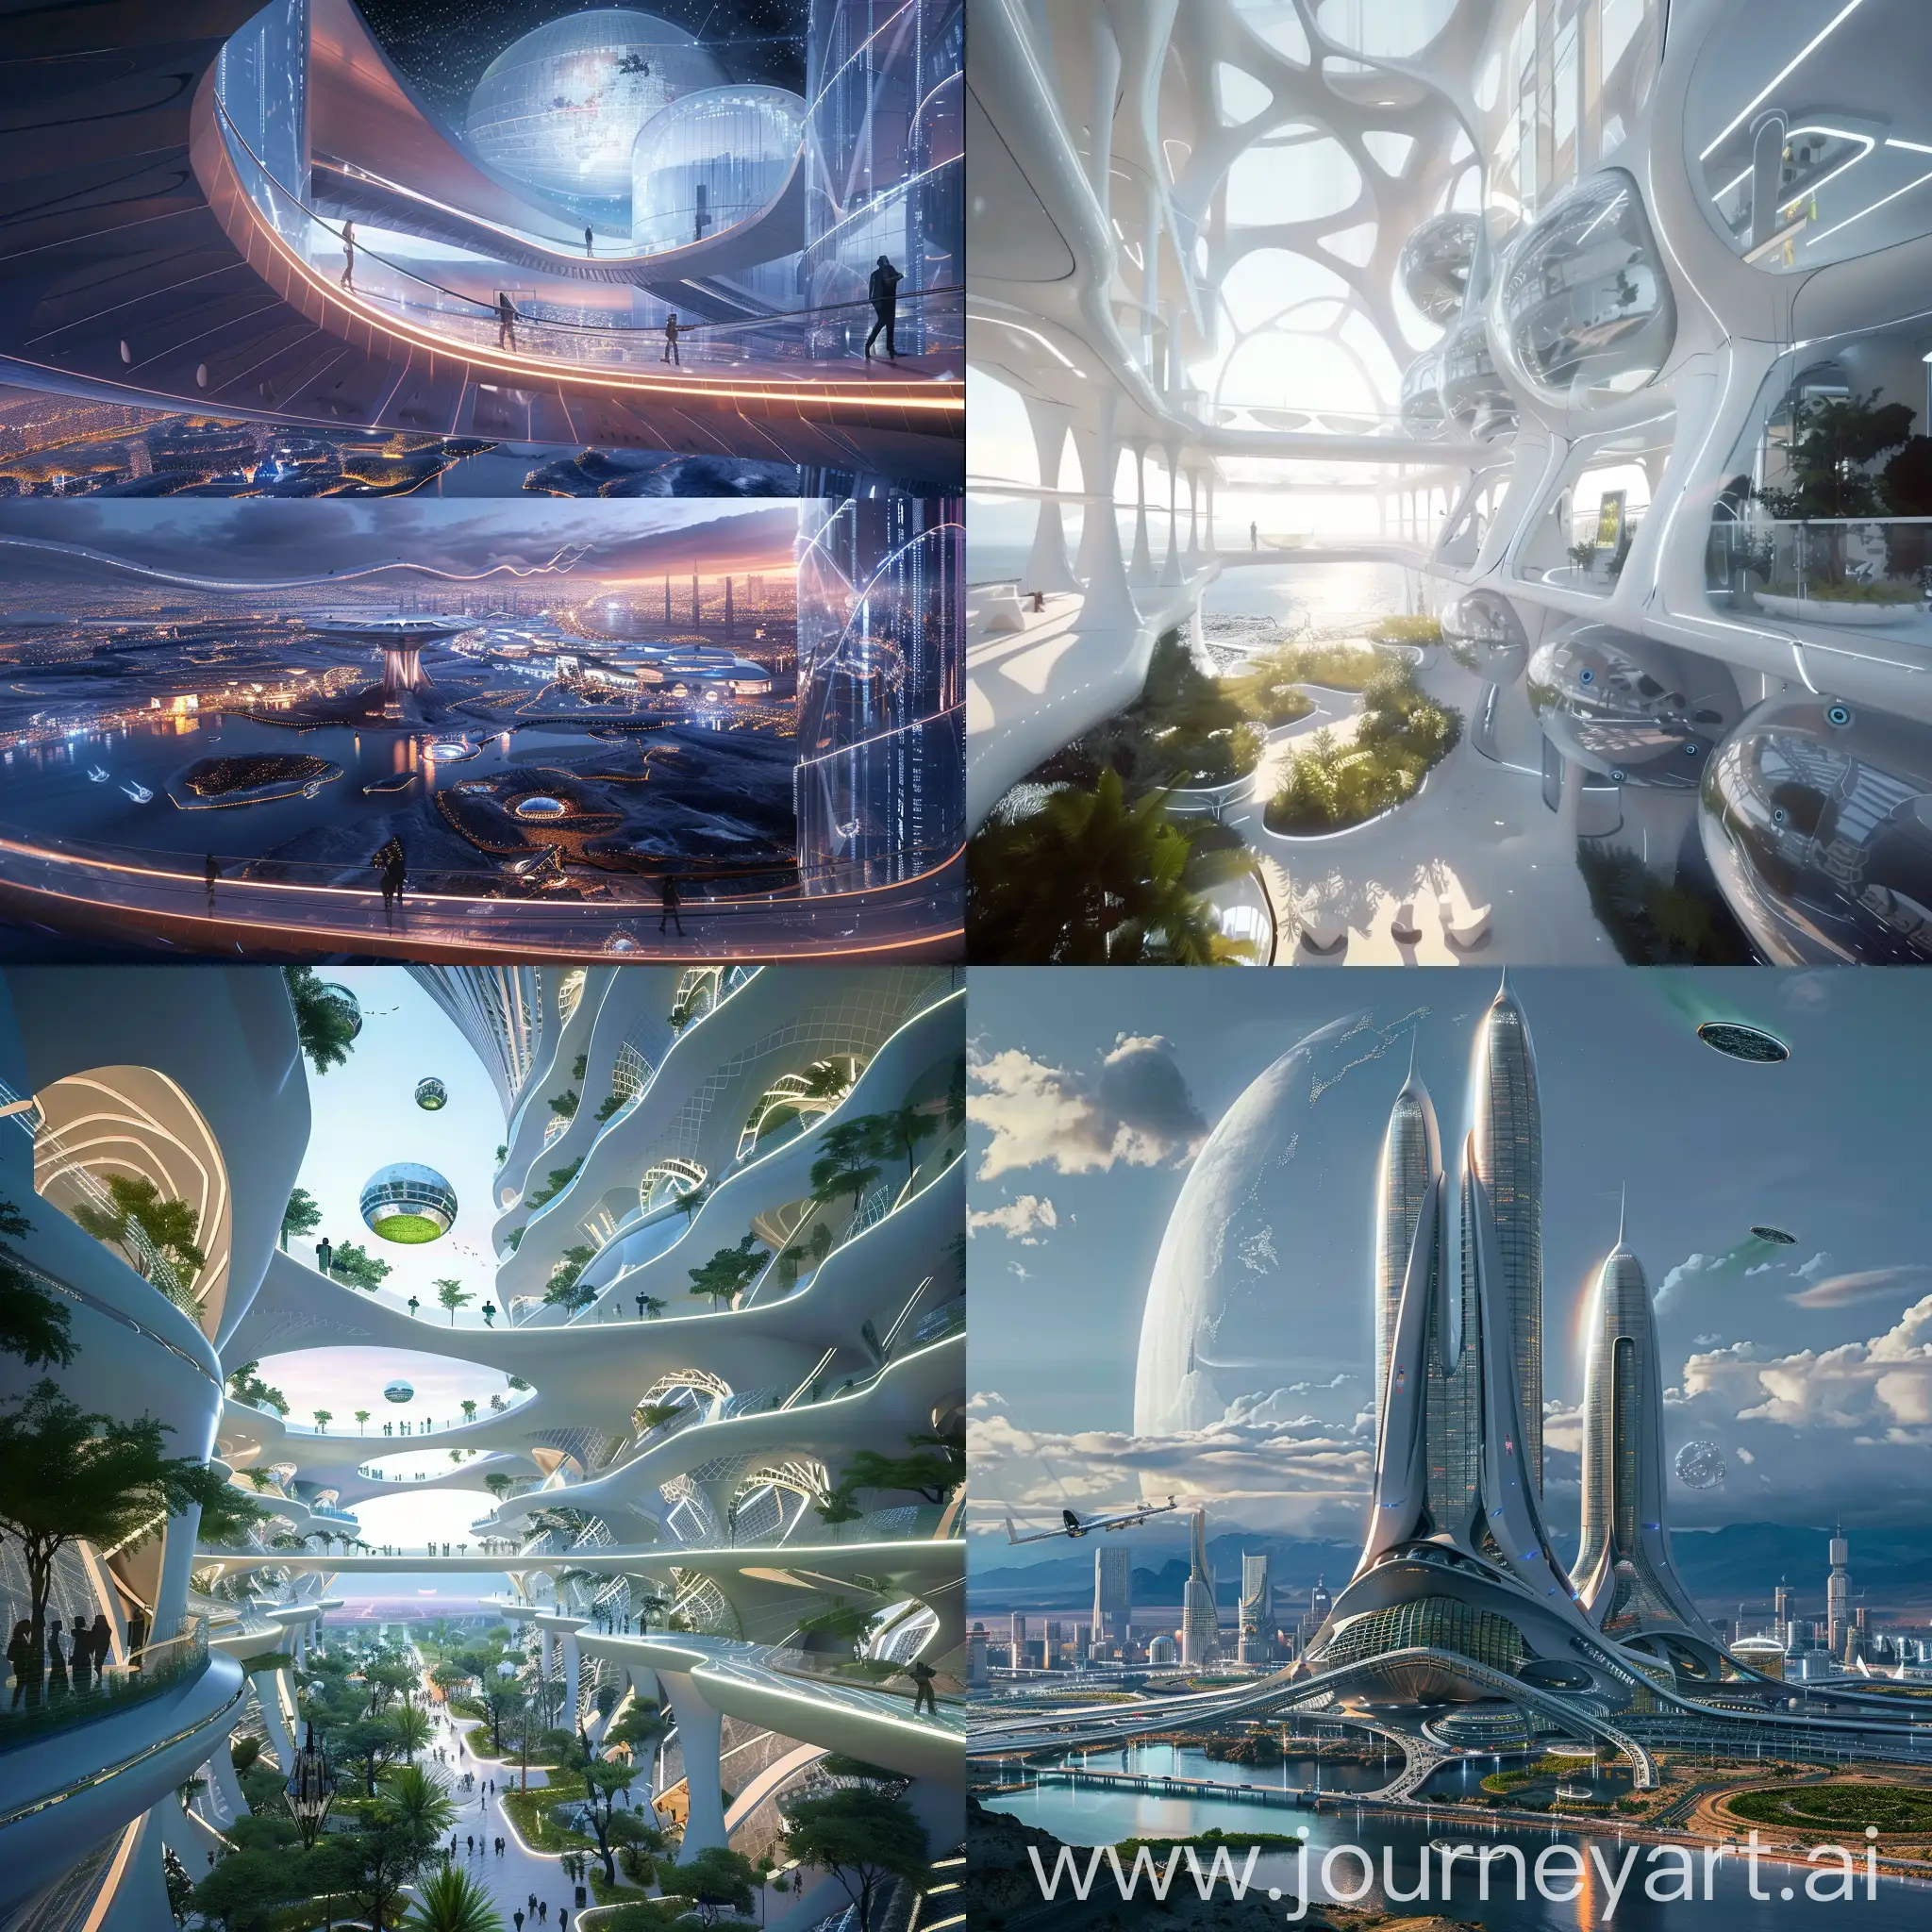 Futuristic Murmansk, Dynamic Facades, Aero-styled Interiors, Kinetic Sculptures, Hyperconnectivity, Multi-Level Living, Vertical Gardens, High-Speed Transportation, Sustainable Energy Sources, Virtual Reality Integration, Community Hubs, Skybridges and Walkways, Aerodynamic Architecture, Landing Pads and Docking Stations, Kinetic Roofs and Walls, Luminous Landscapes, Vertical Farms, Smart Infrastructure, Light Shows and Holographic Projections, Climate-Controlled Domes, Subterranean Networks, in unreal engine 5 style --stylize 1000